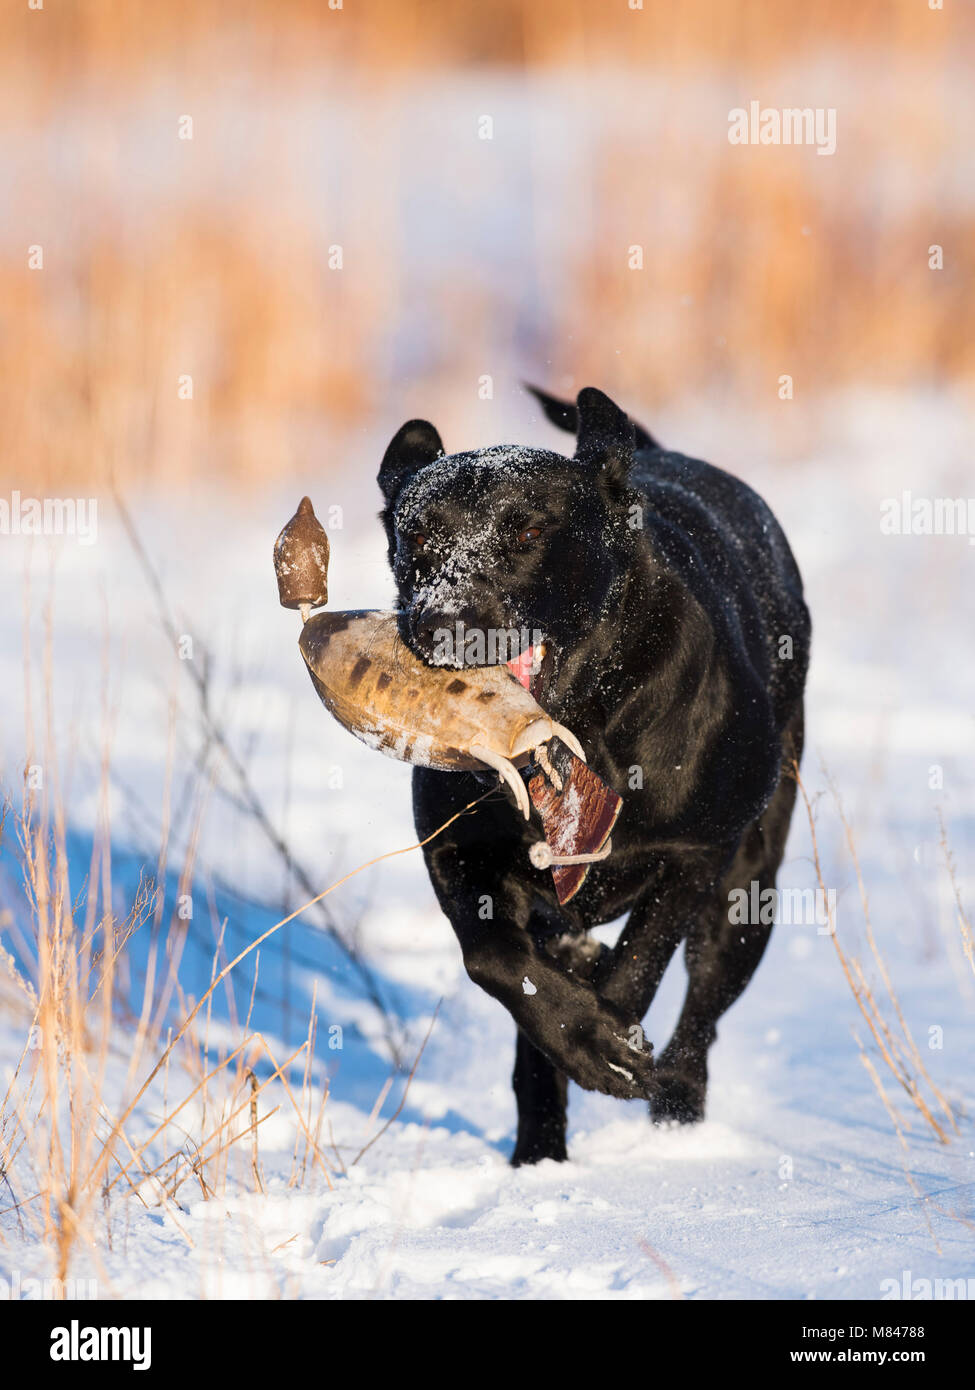 A Black Lab Retriever retrieving training bumpers on a cold winter snowy day Stock Photo